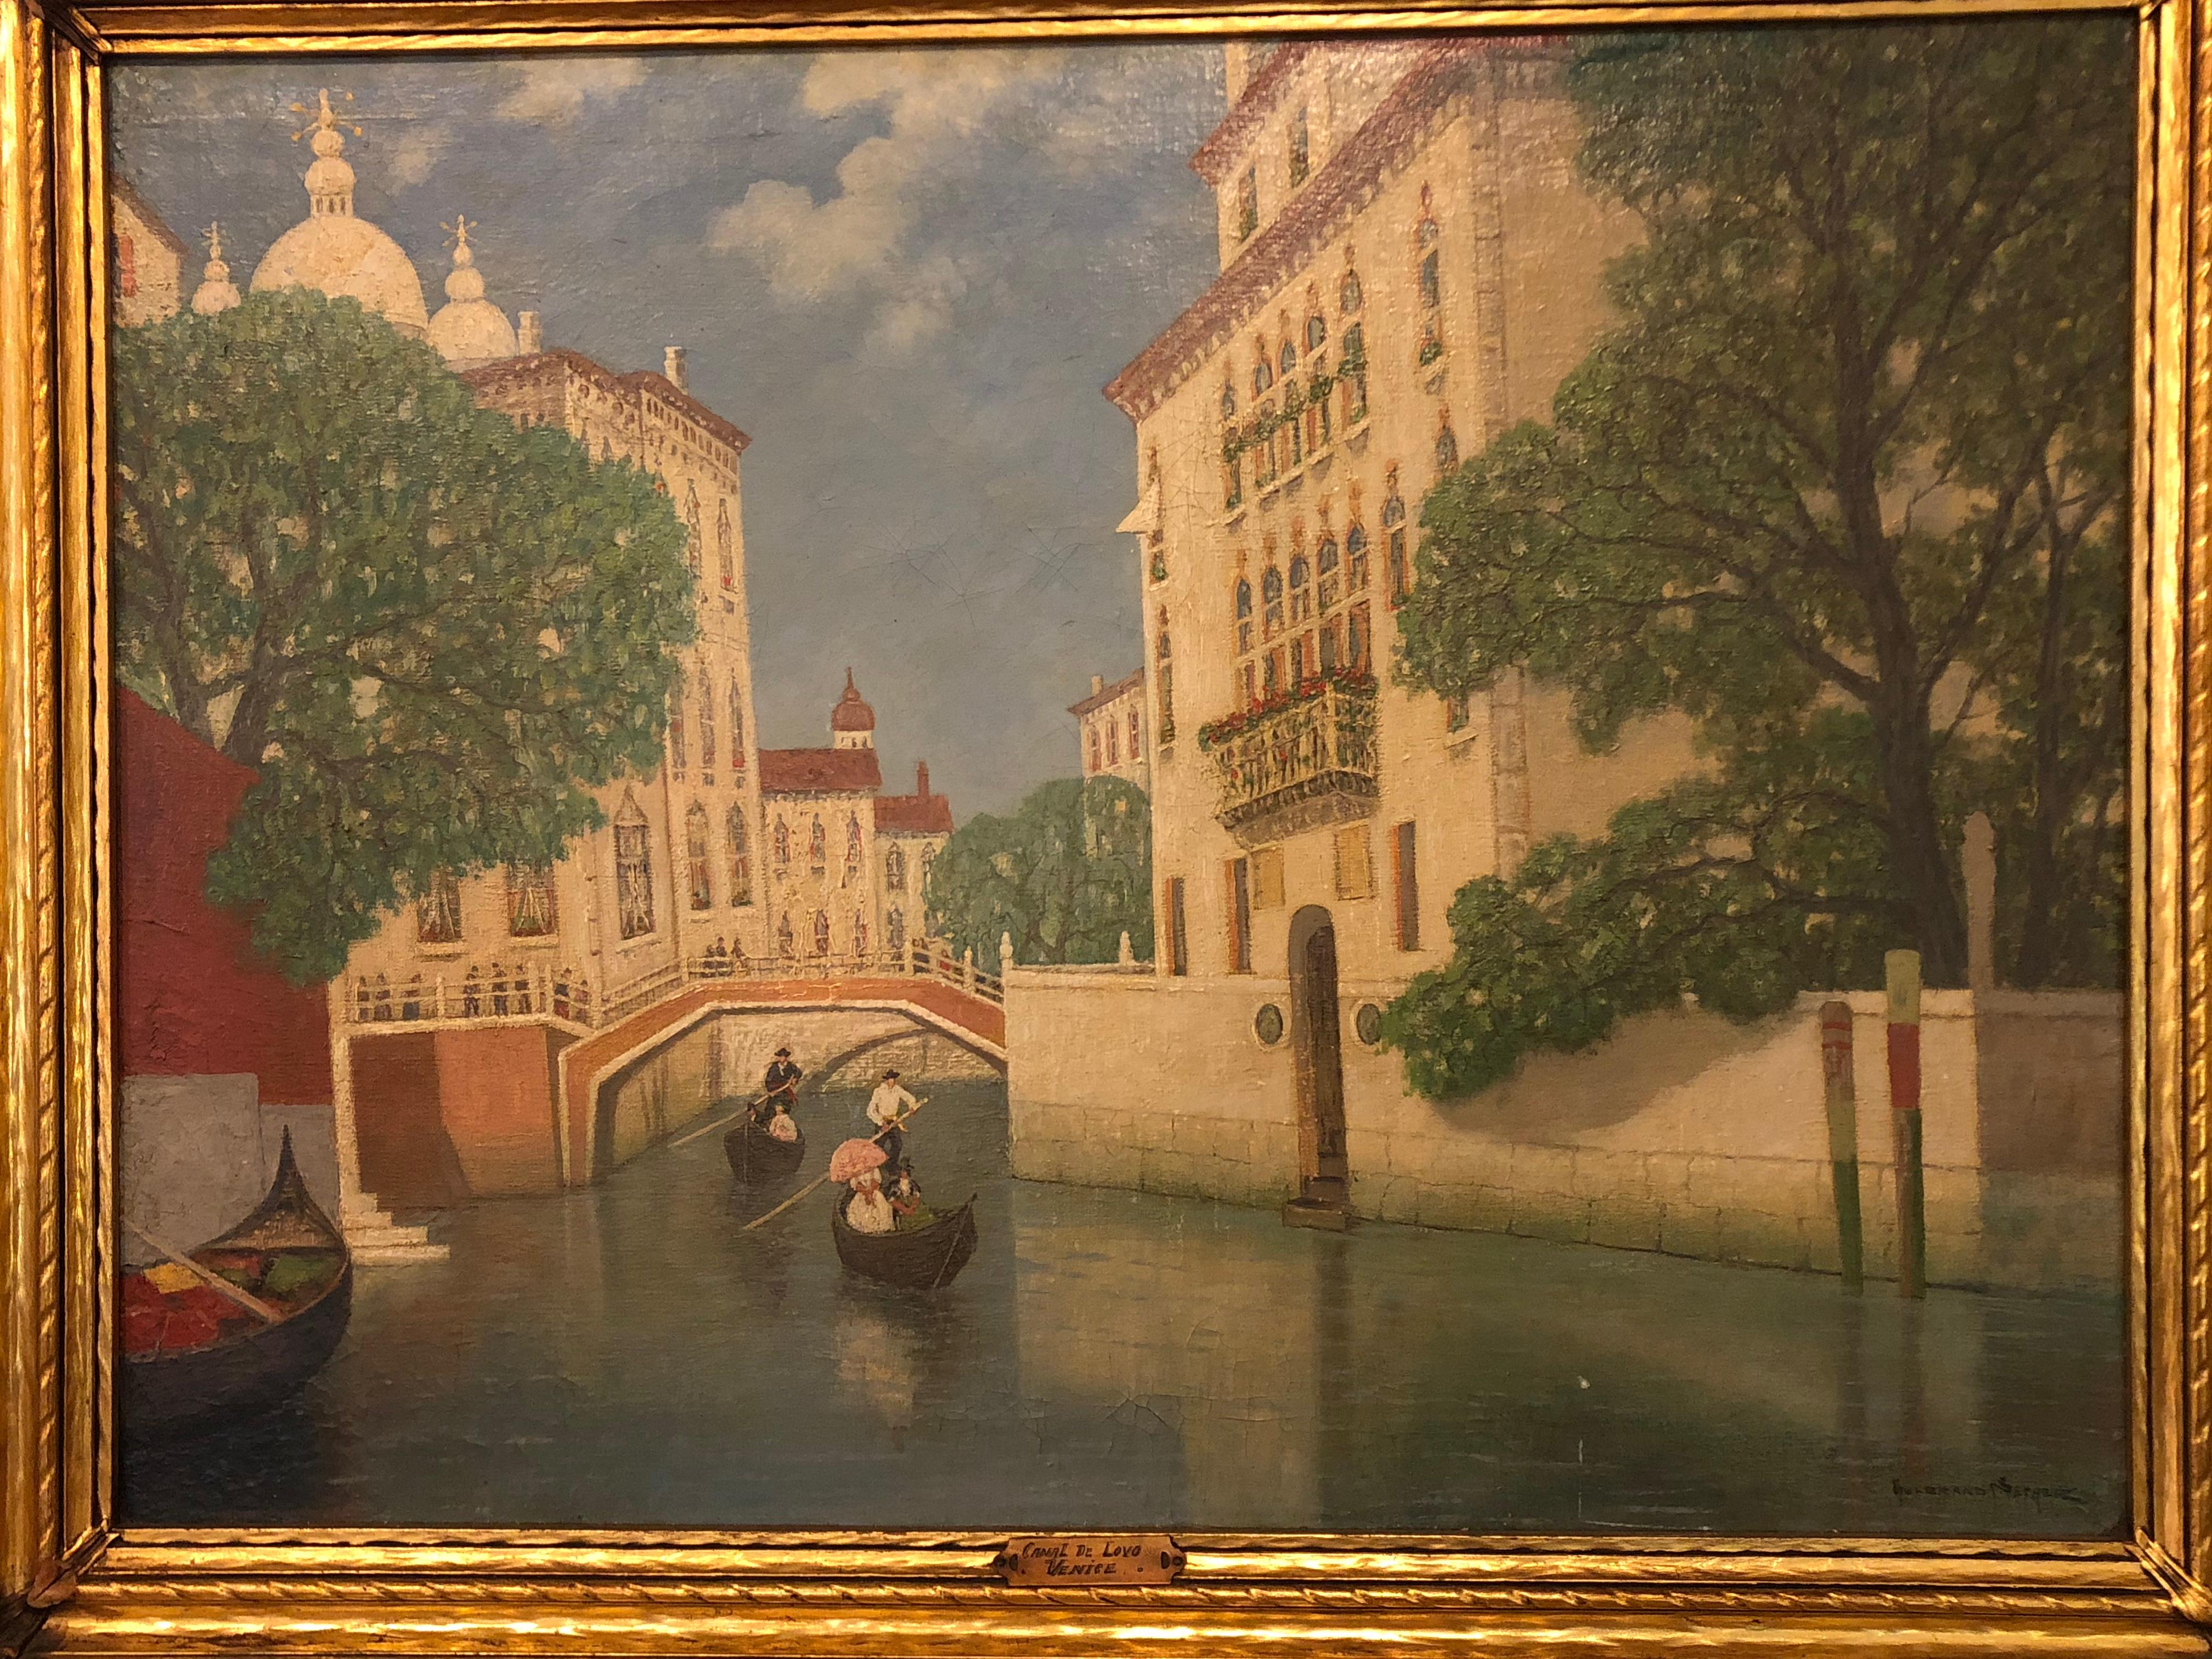 A Gulbrandt Sether Norwegian American oil on canvas of a Venice canal. Canal De lovo -Venice in a fine and highly detained gilt frame. (Paperwork on reverse).
Gulbrand Sether was born in Saerskovbygda, Elverum, Norway, in 1869. He worked on